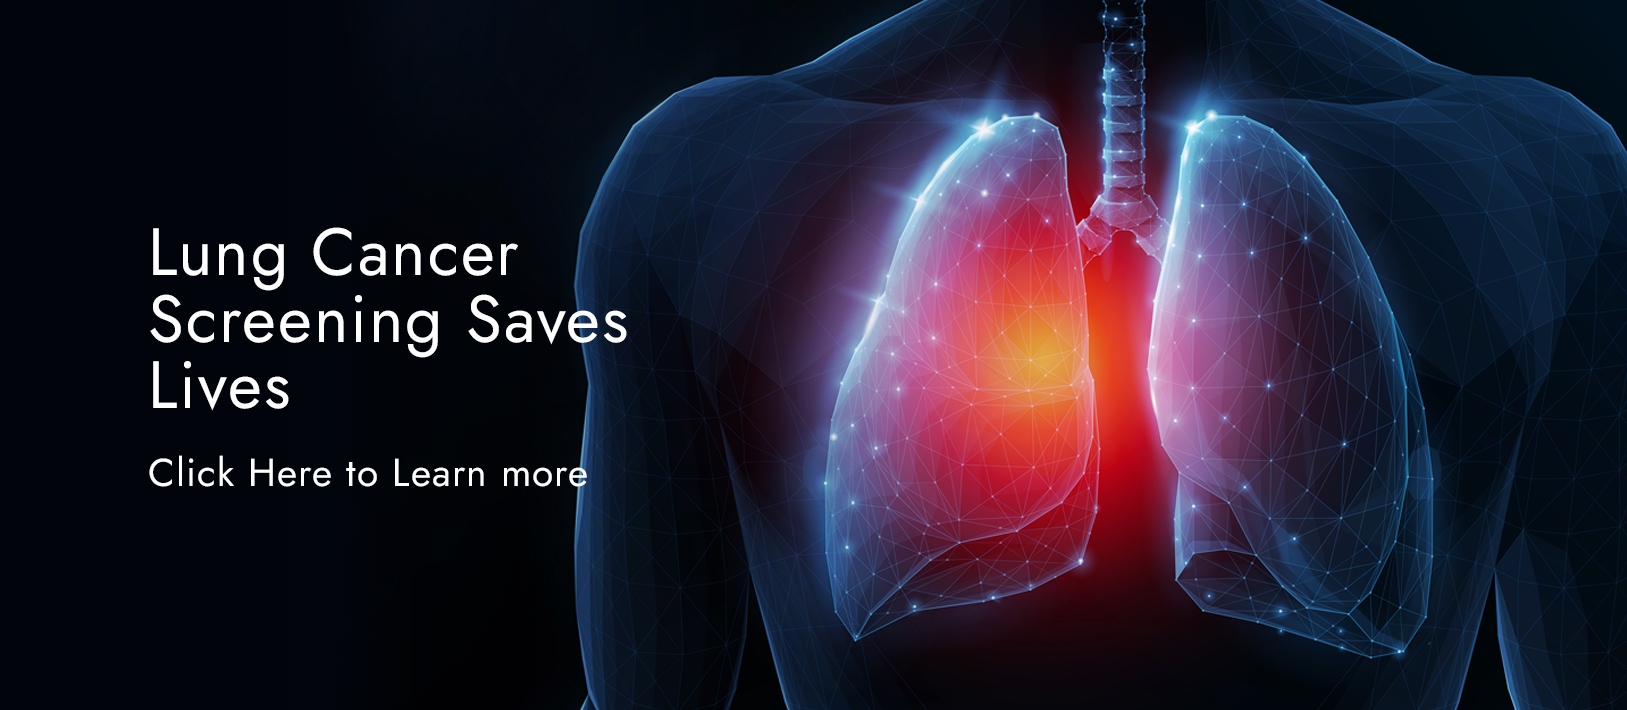 Lung Cancer Screening Saves Lives
Early detection of lung cancer is most treatable.